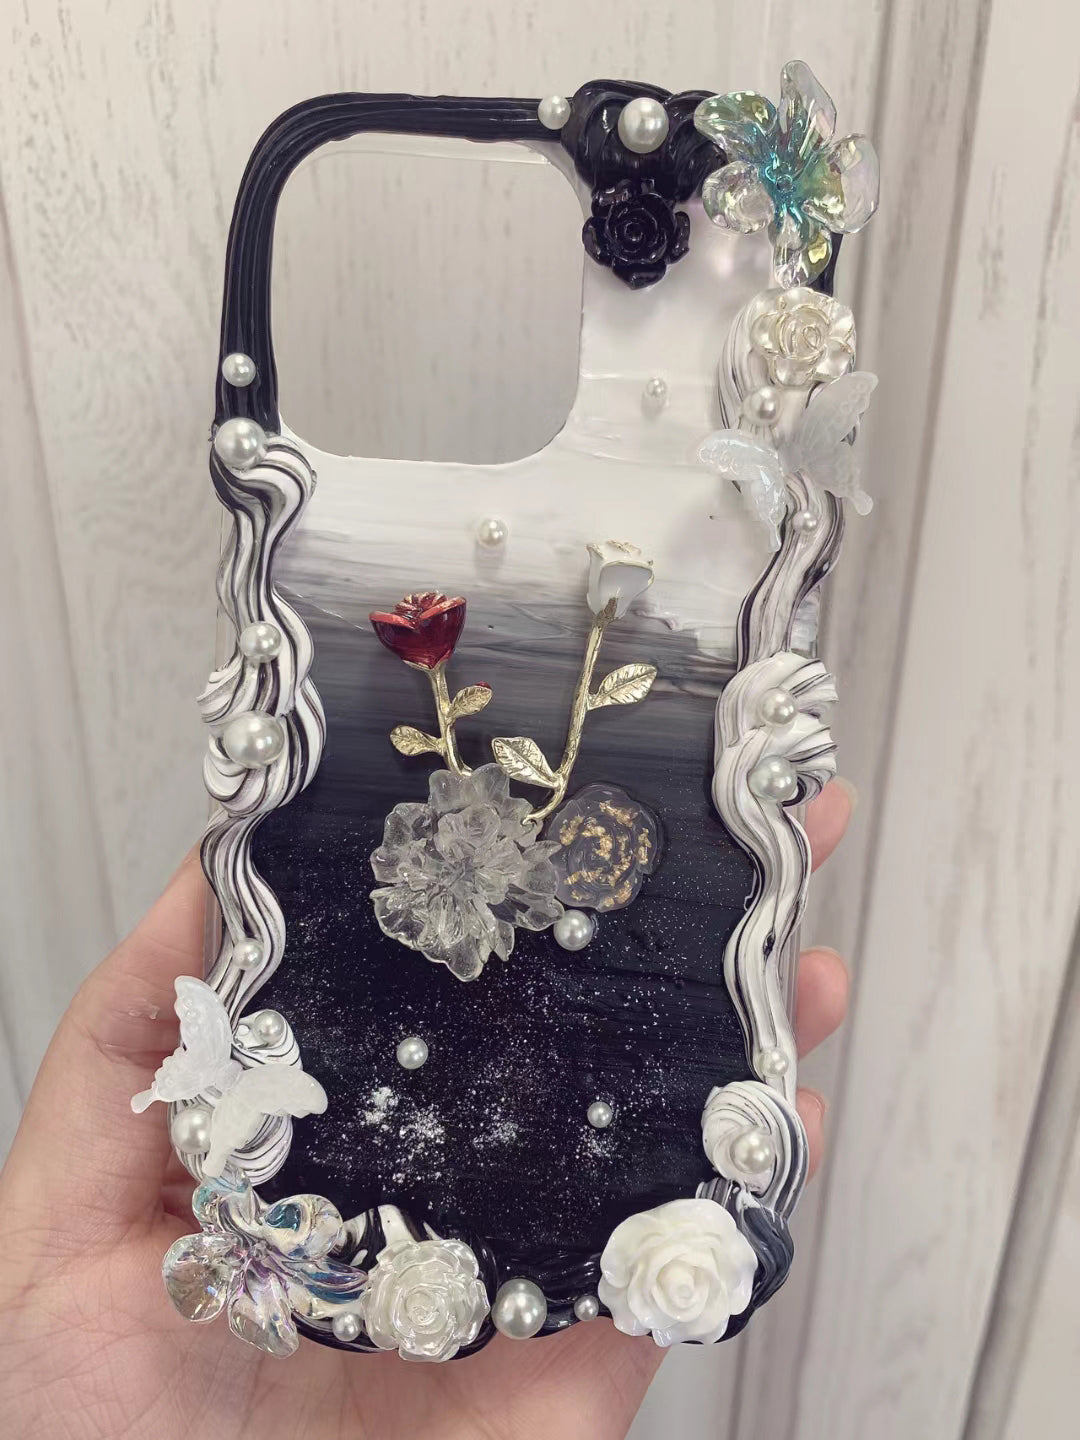 Cute and Chic Handmade Decoden Phone Case with Roses